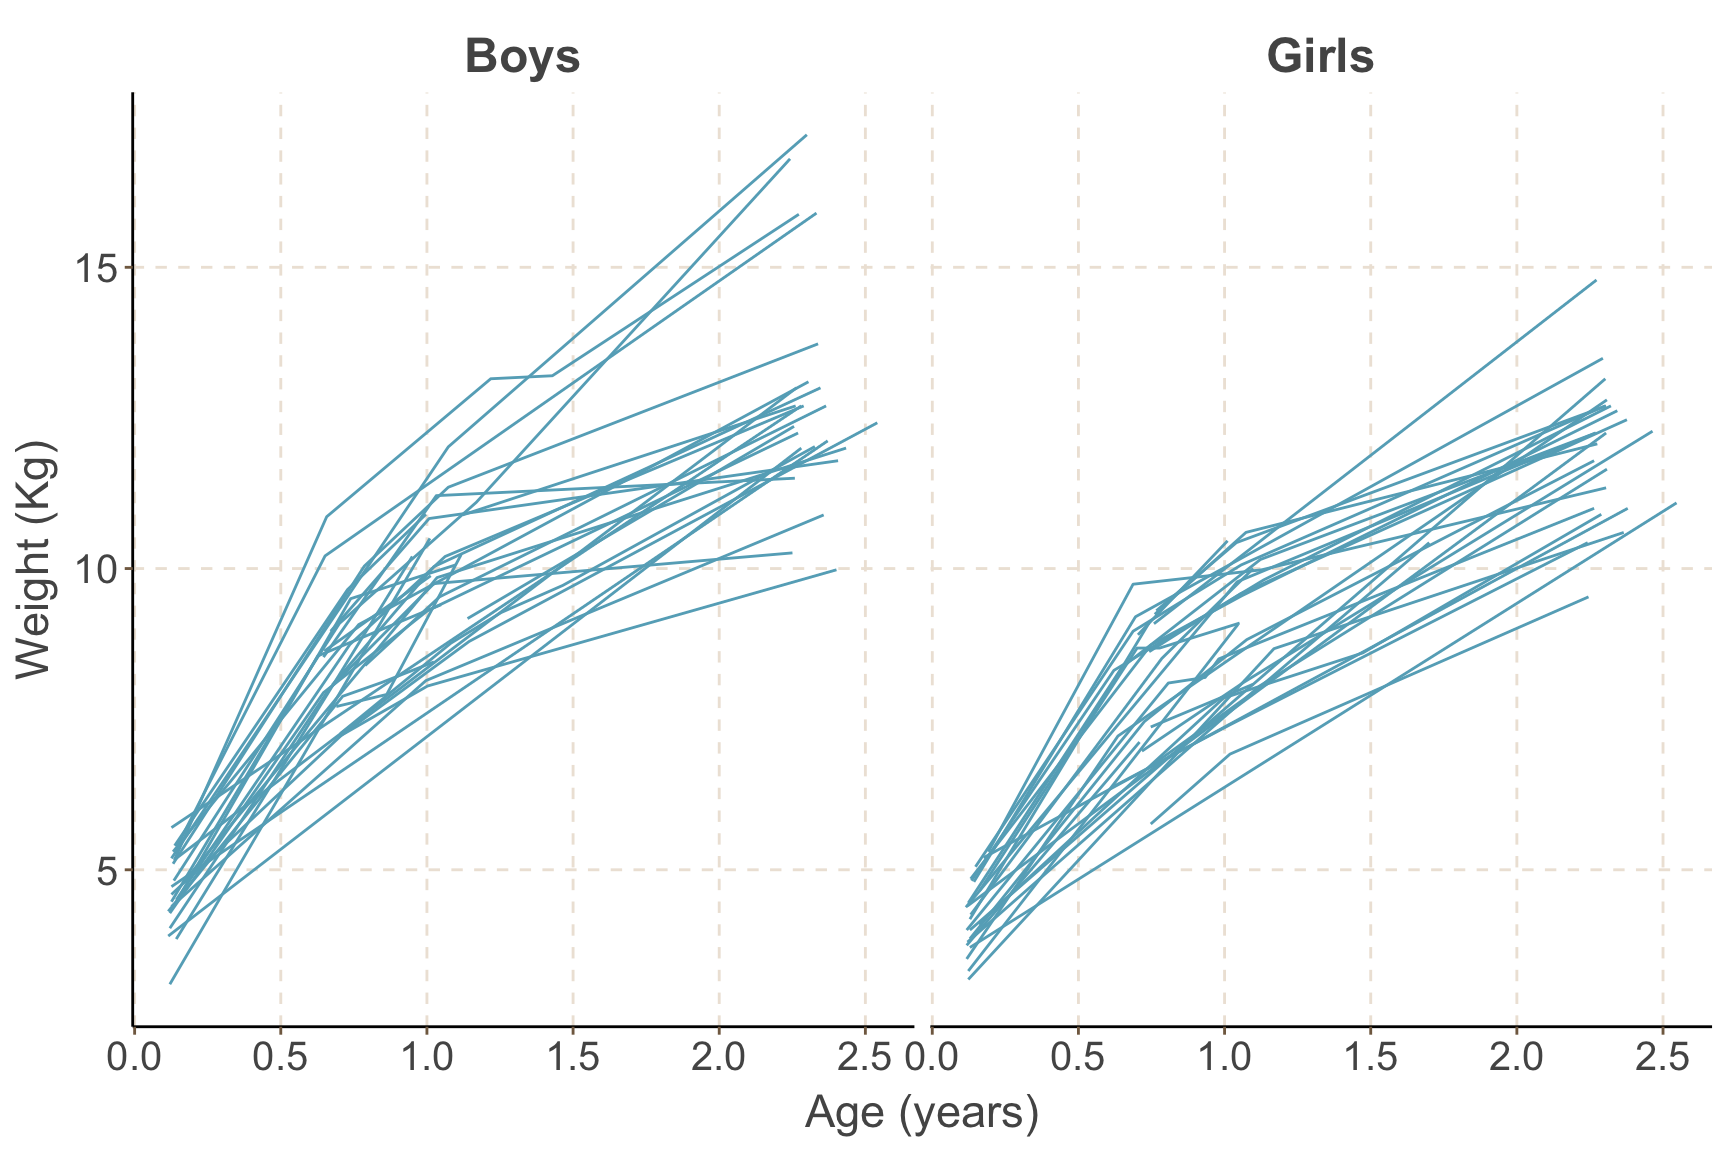 Growth profiles of boys and girls in the Asian growth data